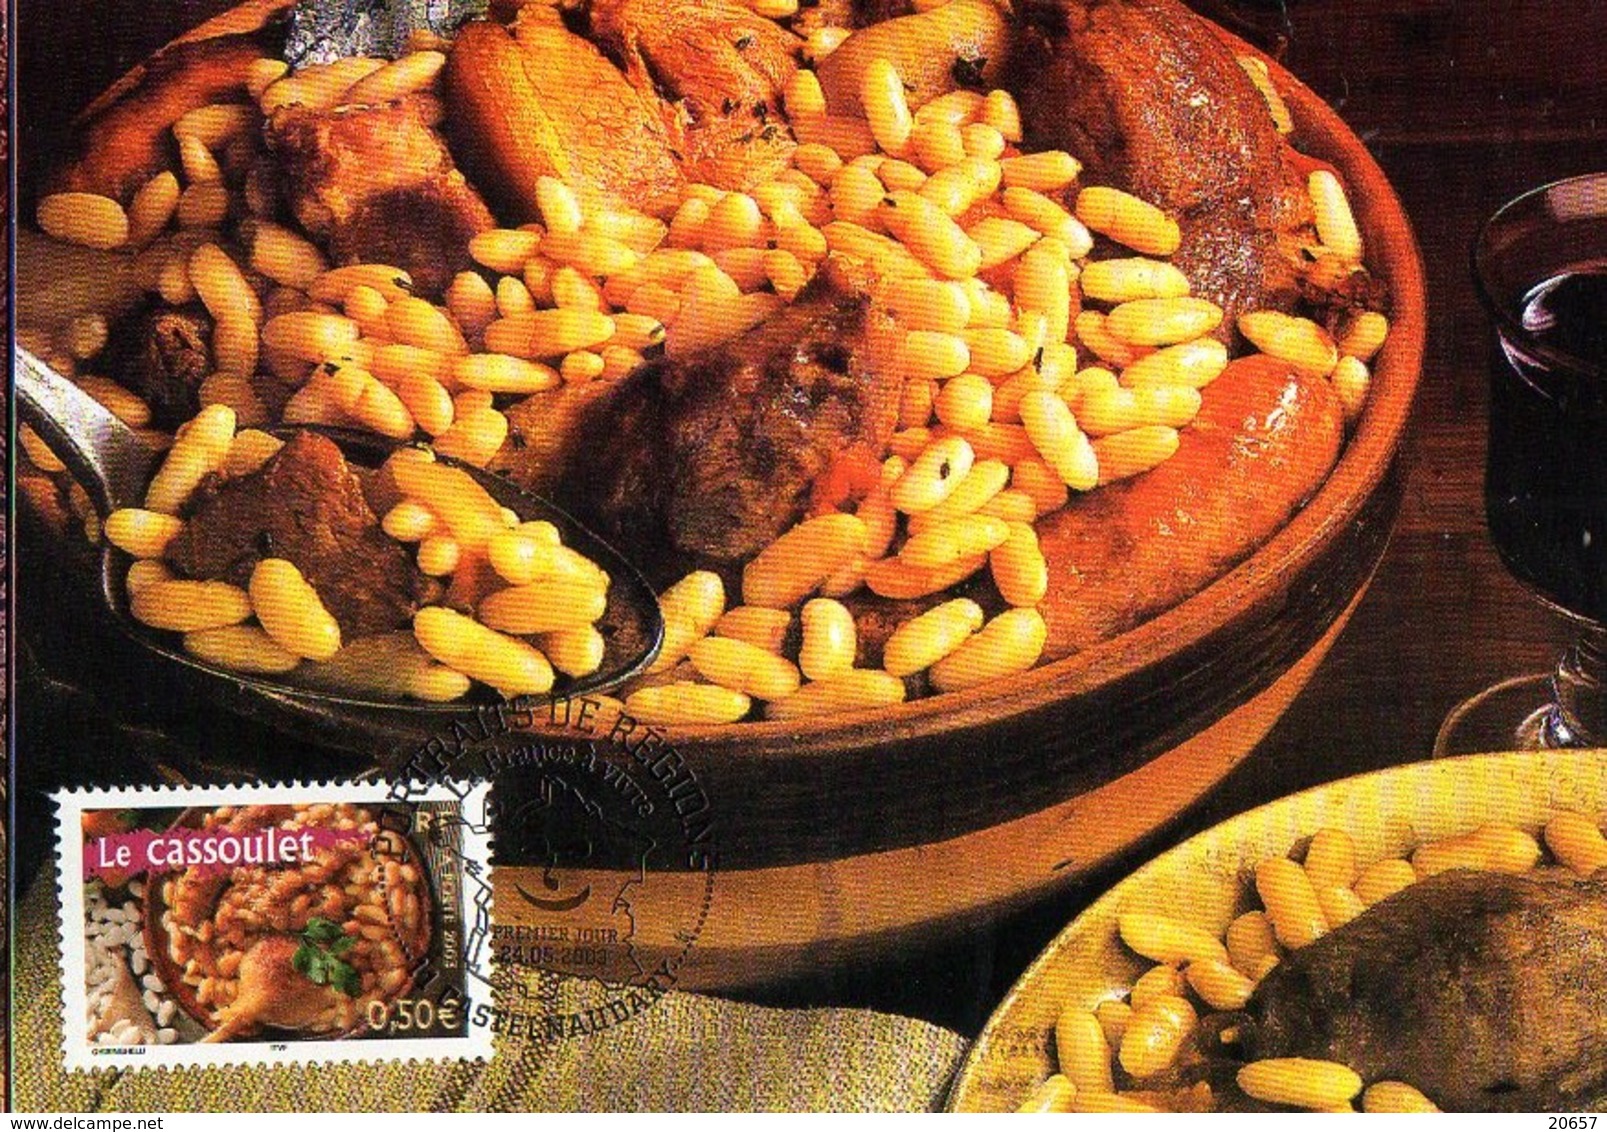 France 3567 Fdc Gastronomie Cassoulet, Haricot - Food